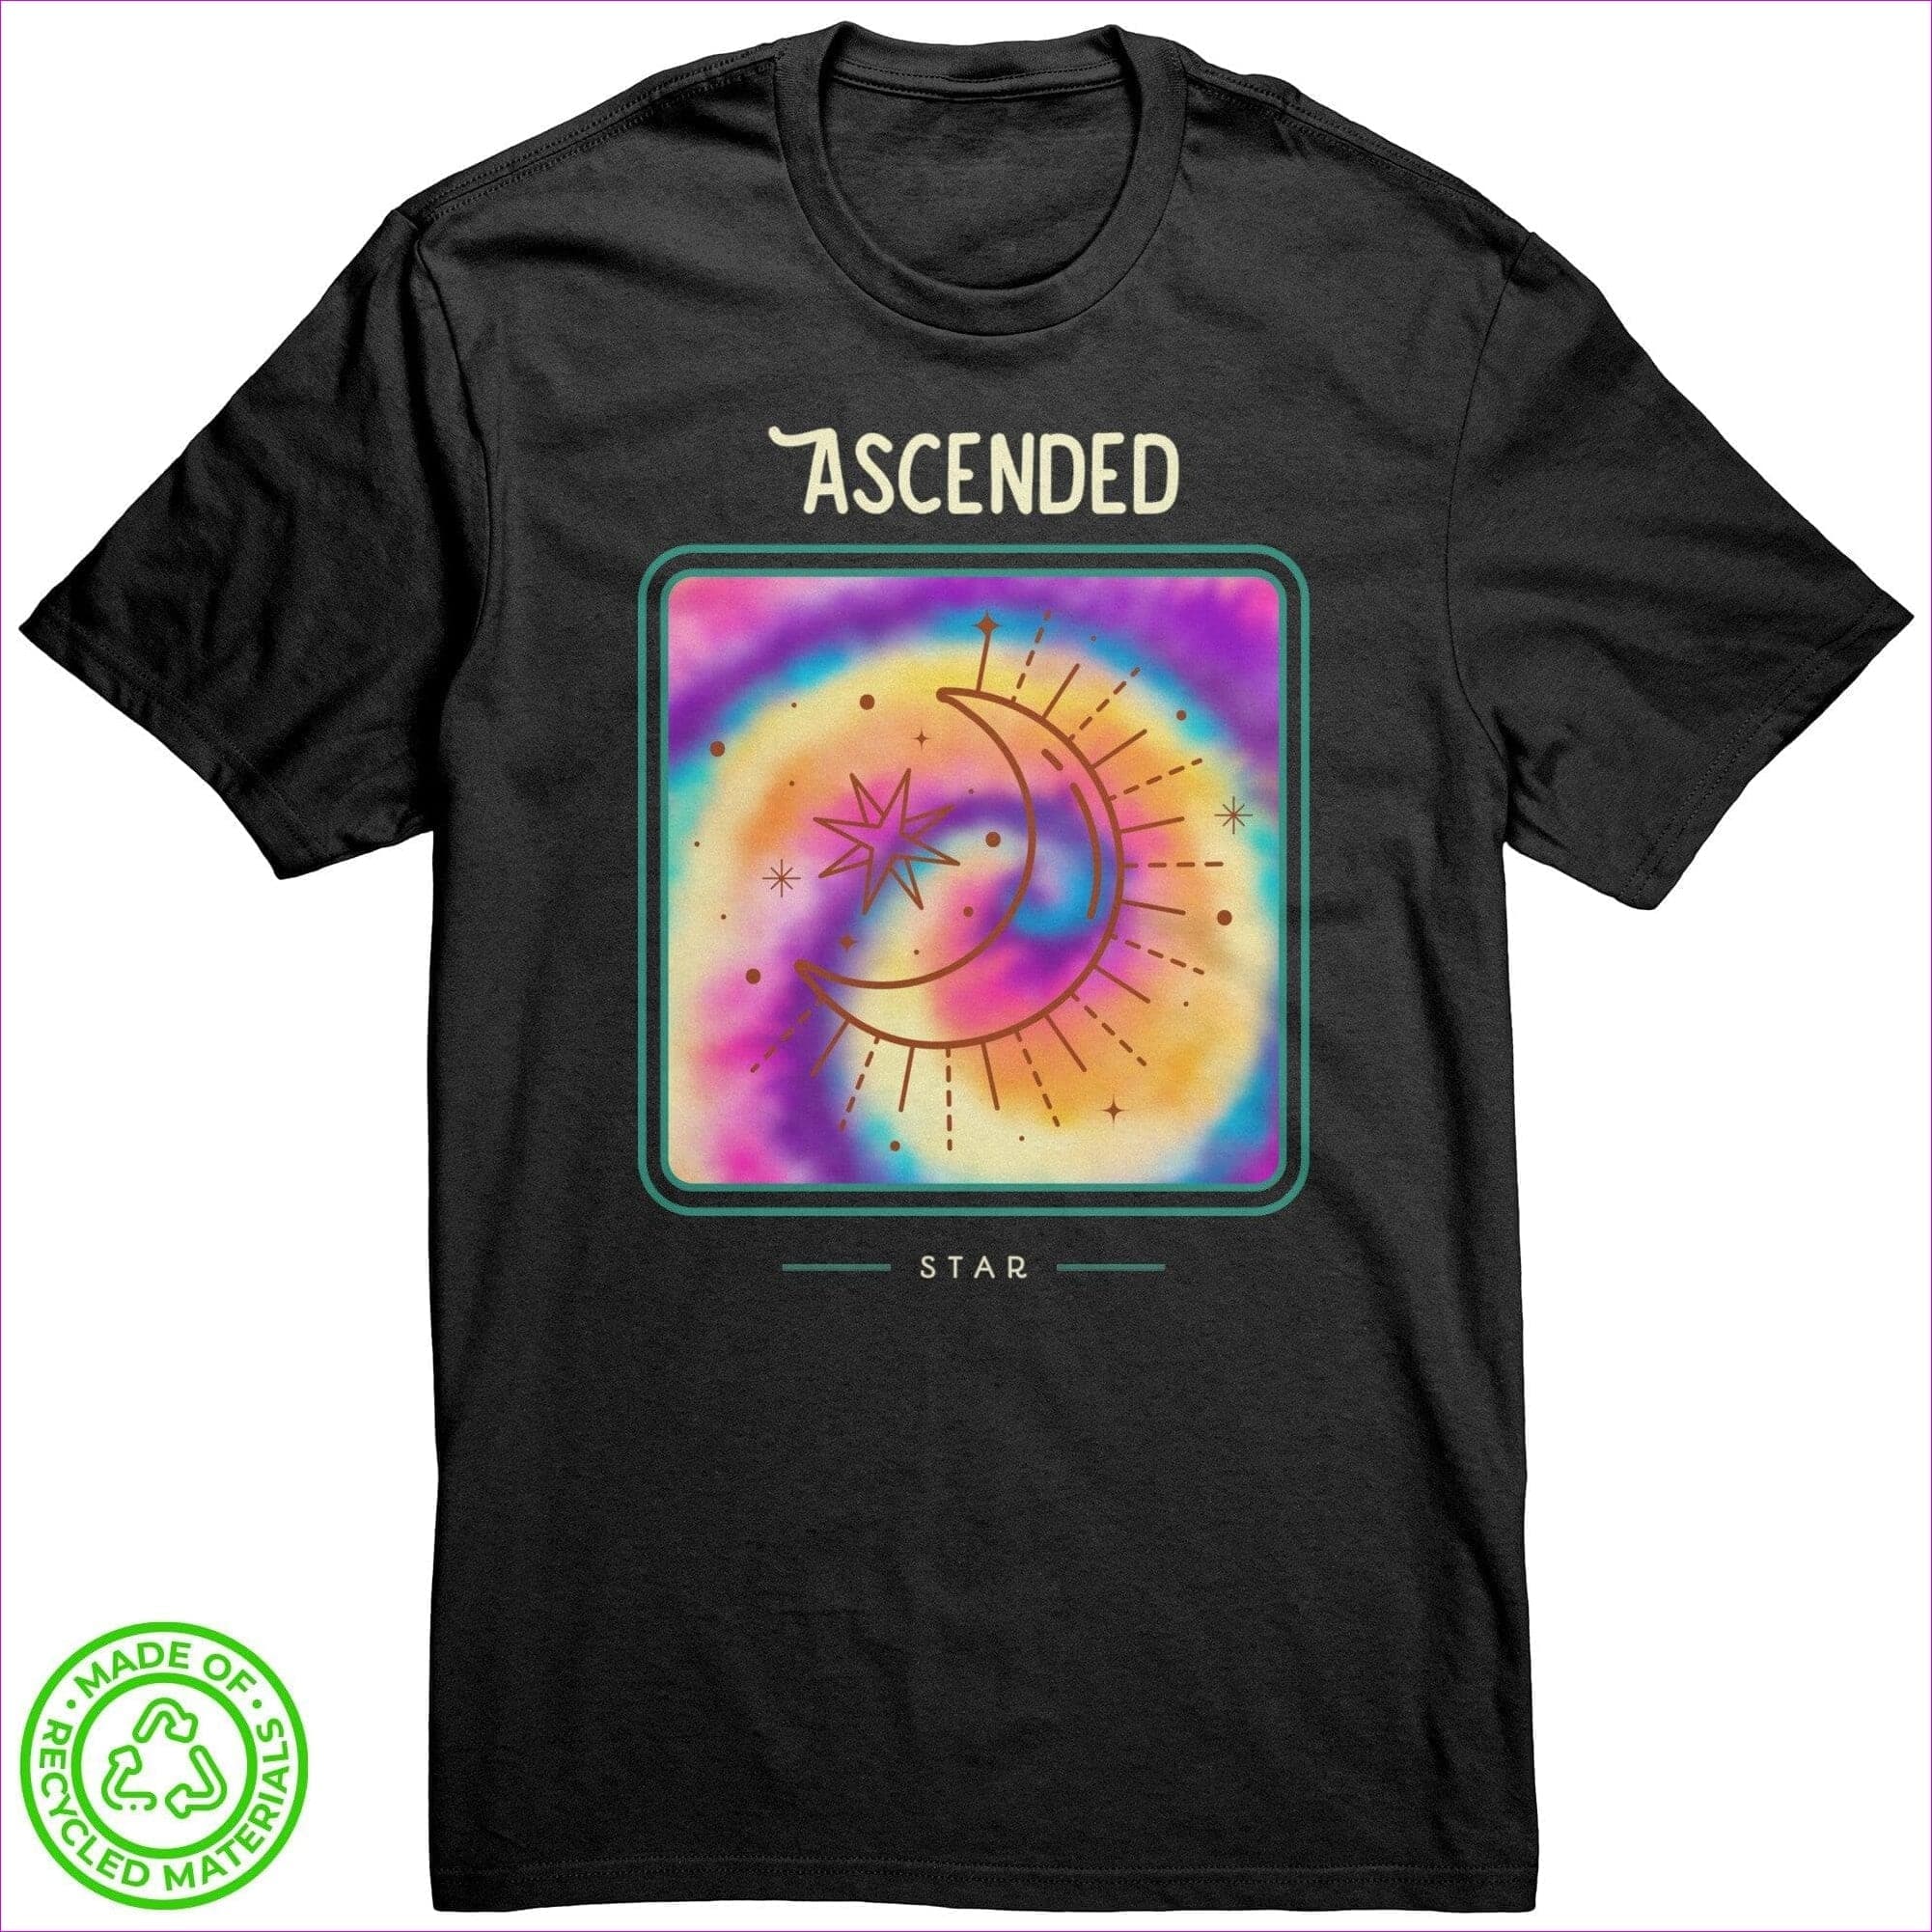 Black - Ascended Recycled Fabric Unisex Tee - Unisex T-Shirt at TFC&H Co.